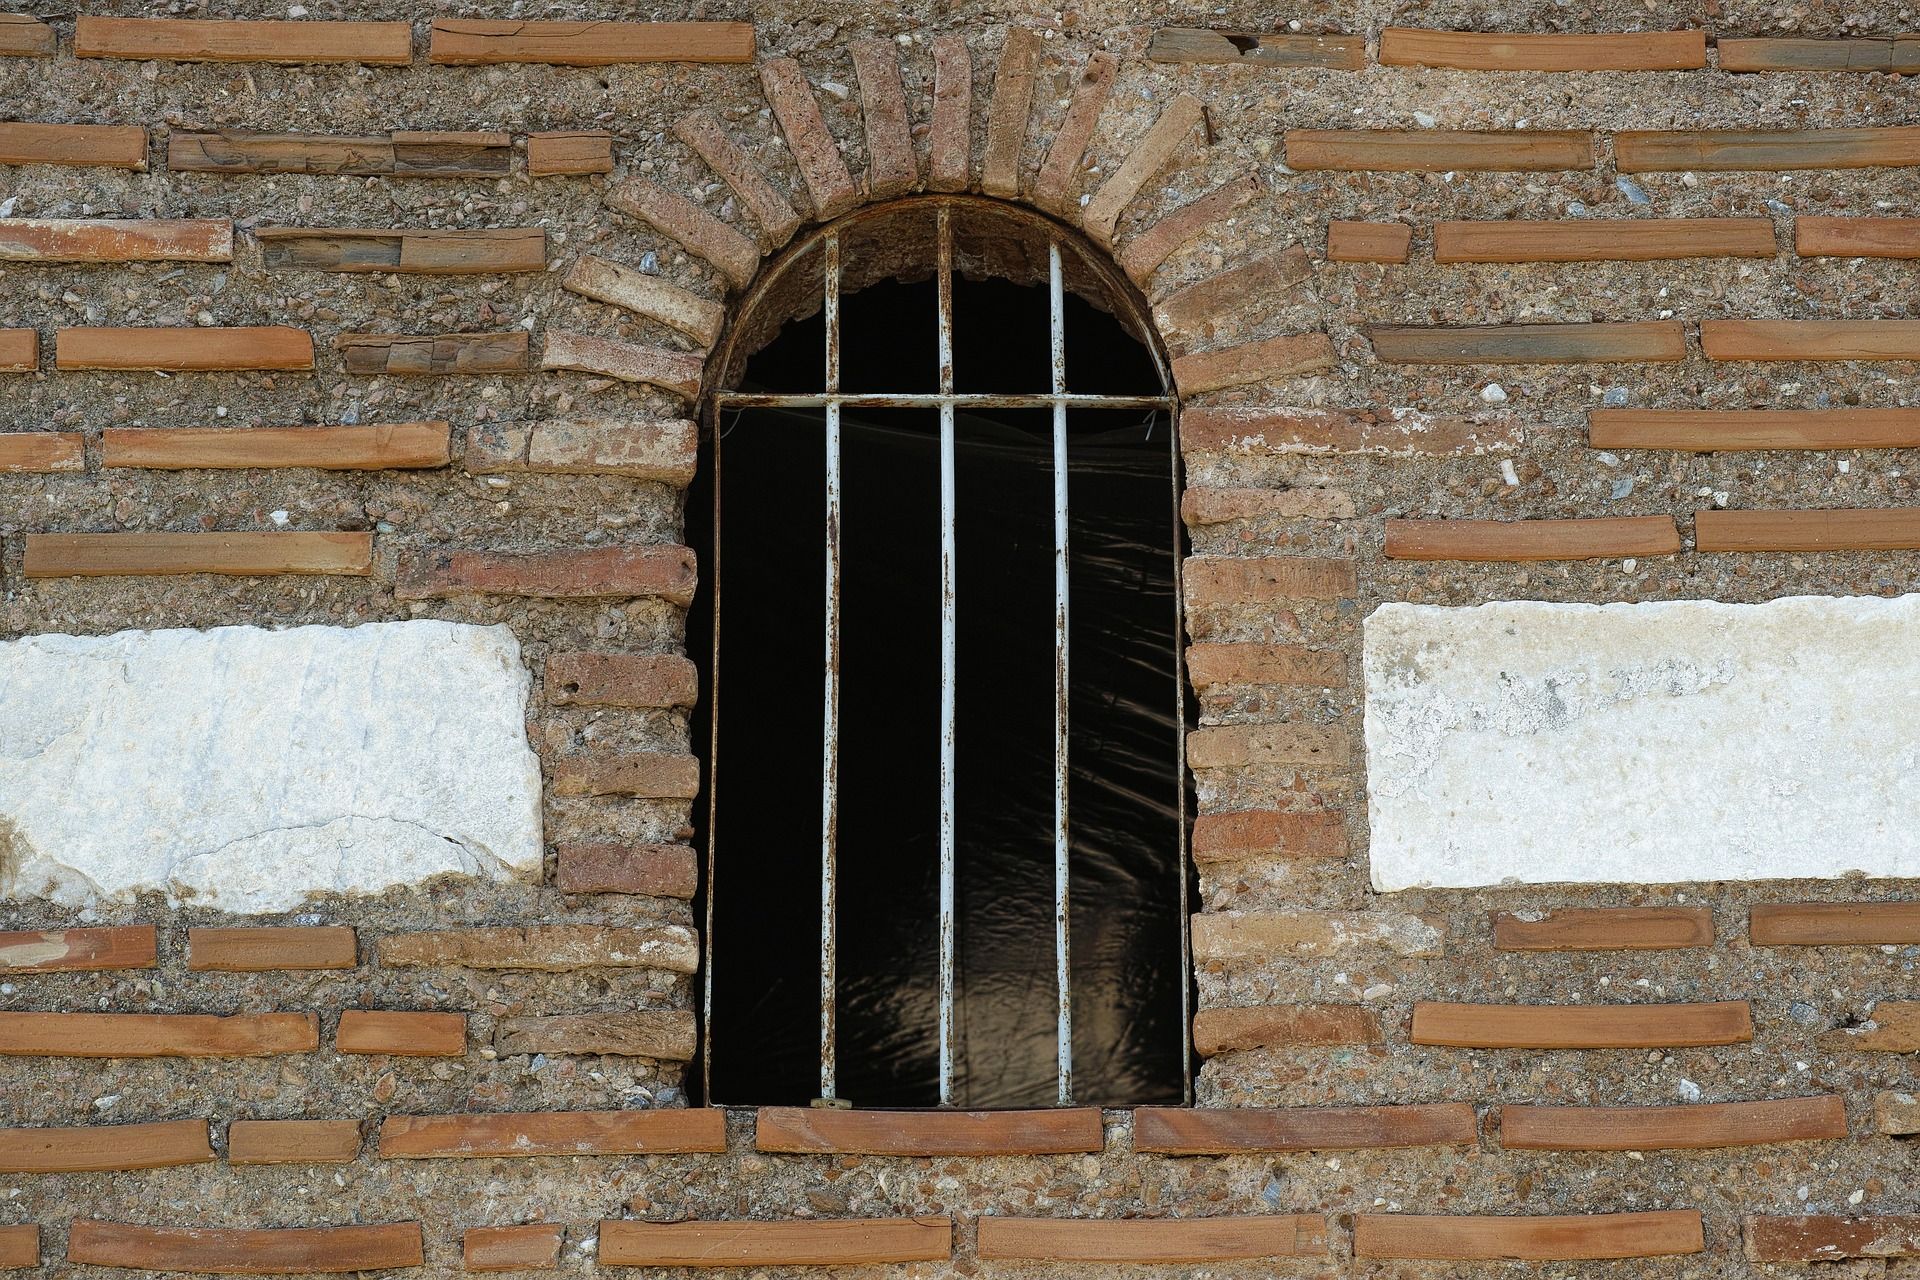 Barred window in an old prison dungeon